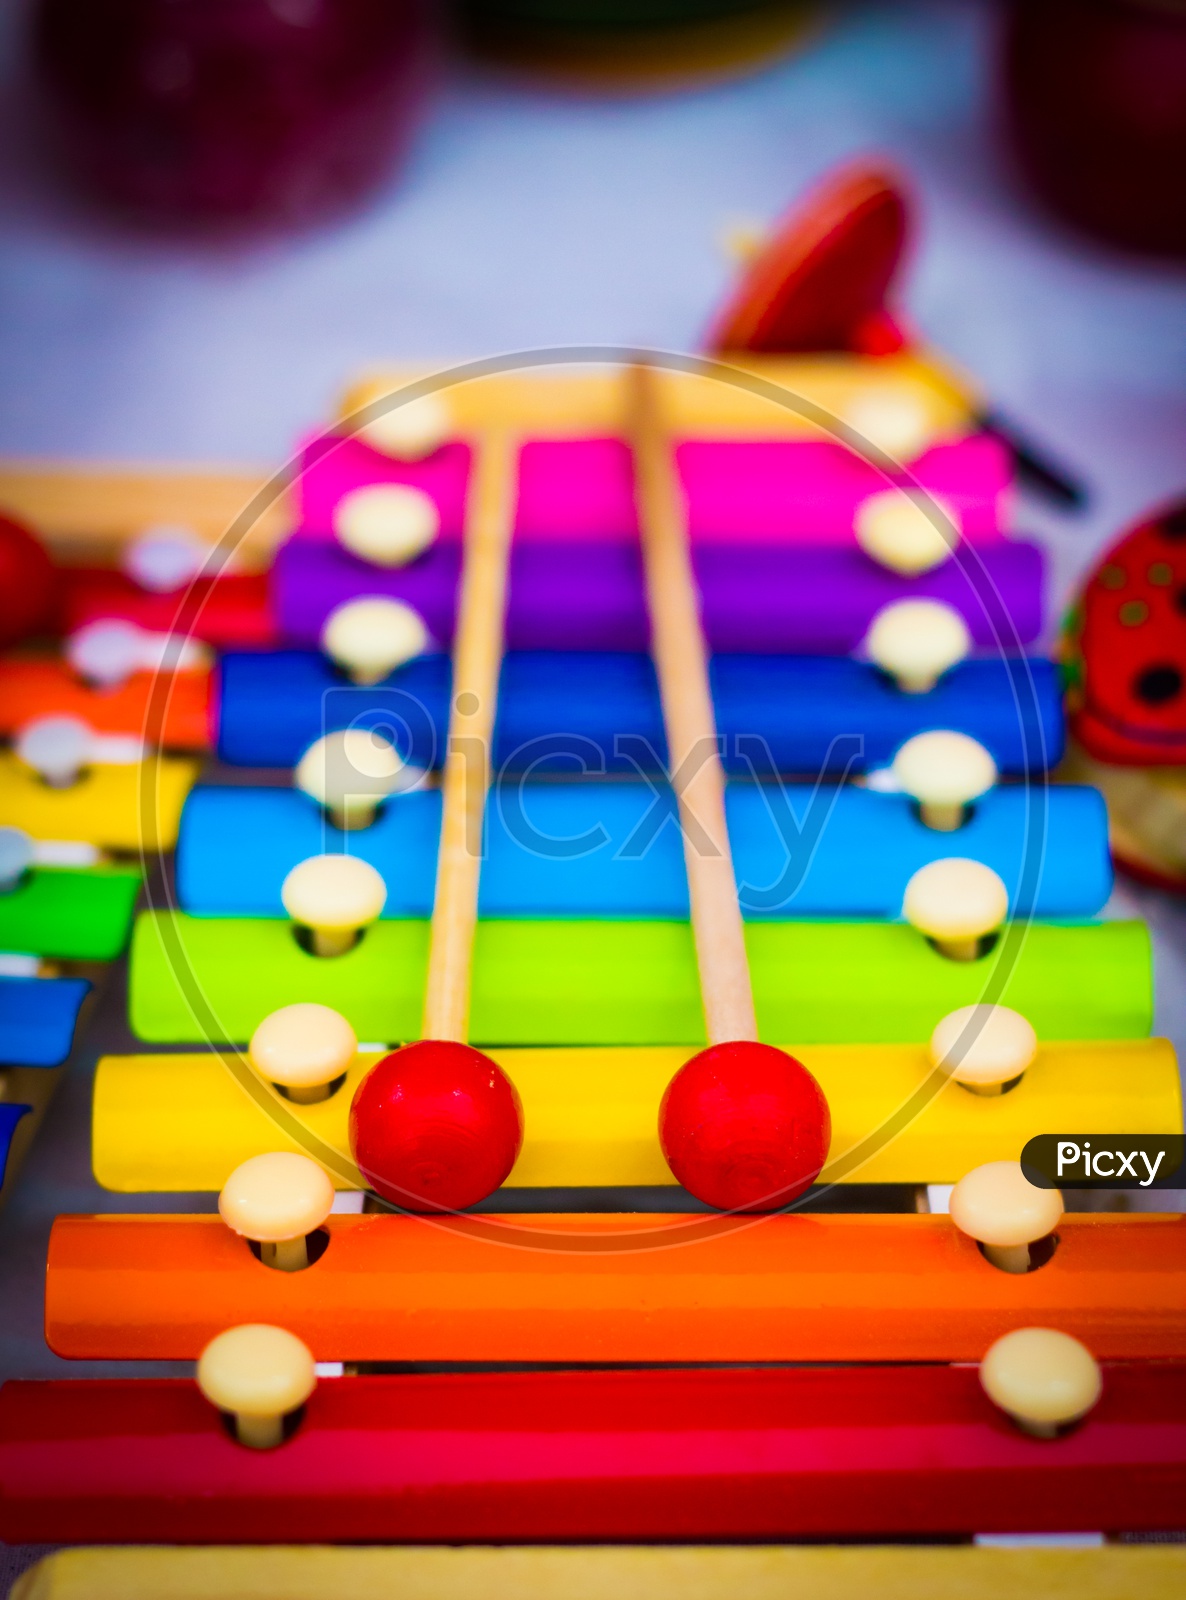 Colorful Rainbow Colored Wooden Xylophone Shot In Shallow Depth If Field